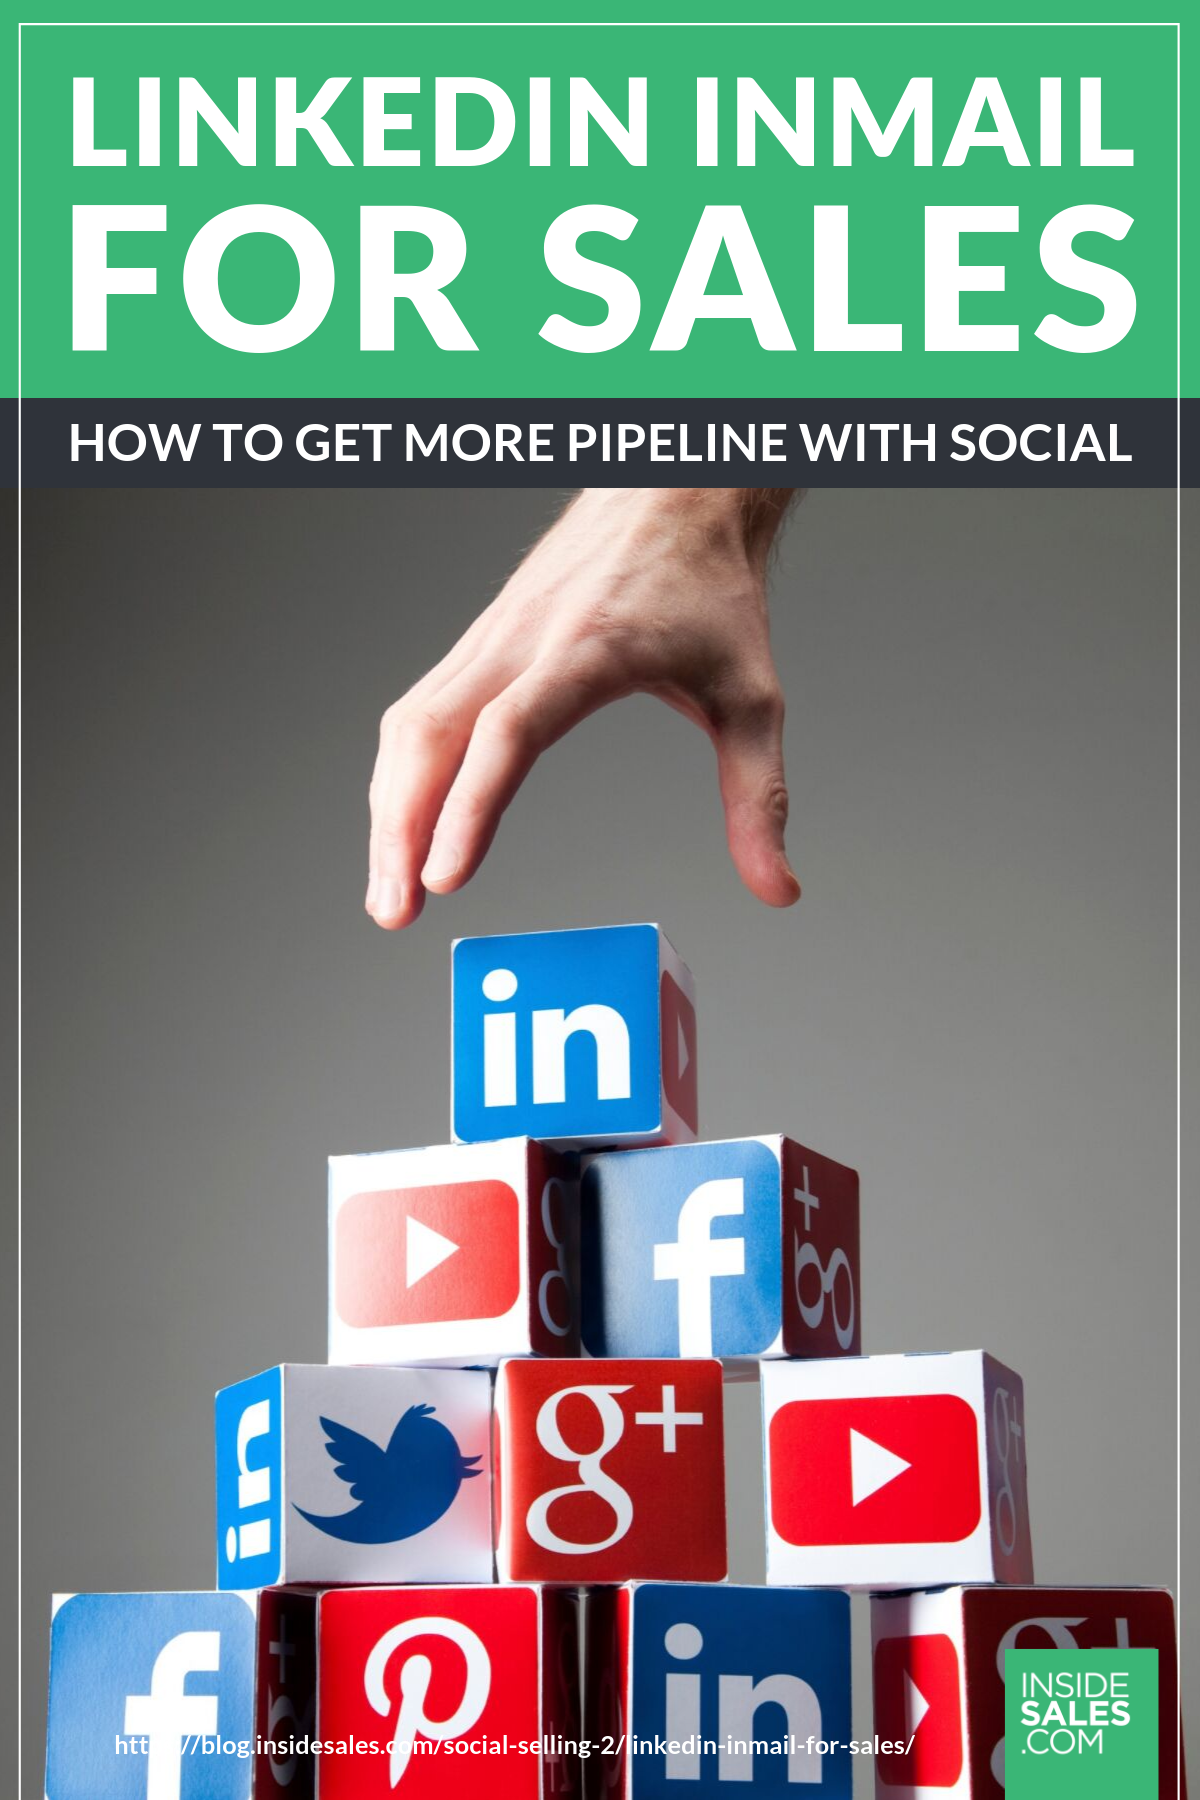 LinkedIn InMail For Sales — How To Get More Pipeline With Social https://www.insidesales.com/blog/social-selling-2/linkedin-inmail-for-sales/